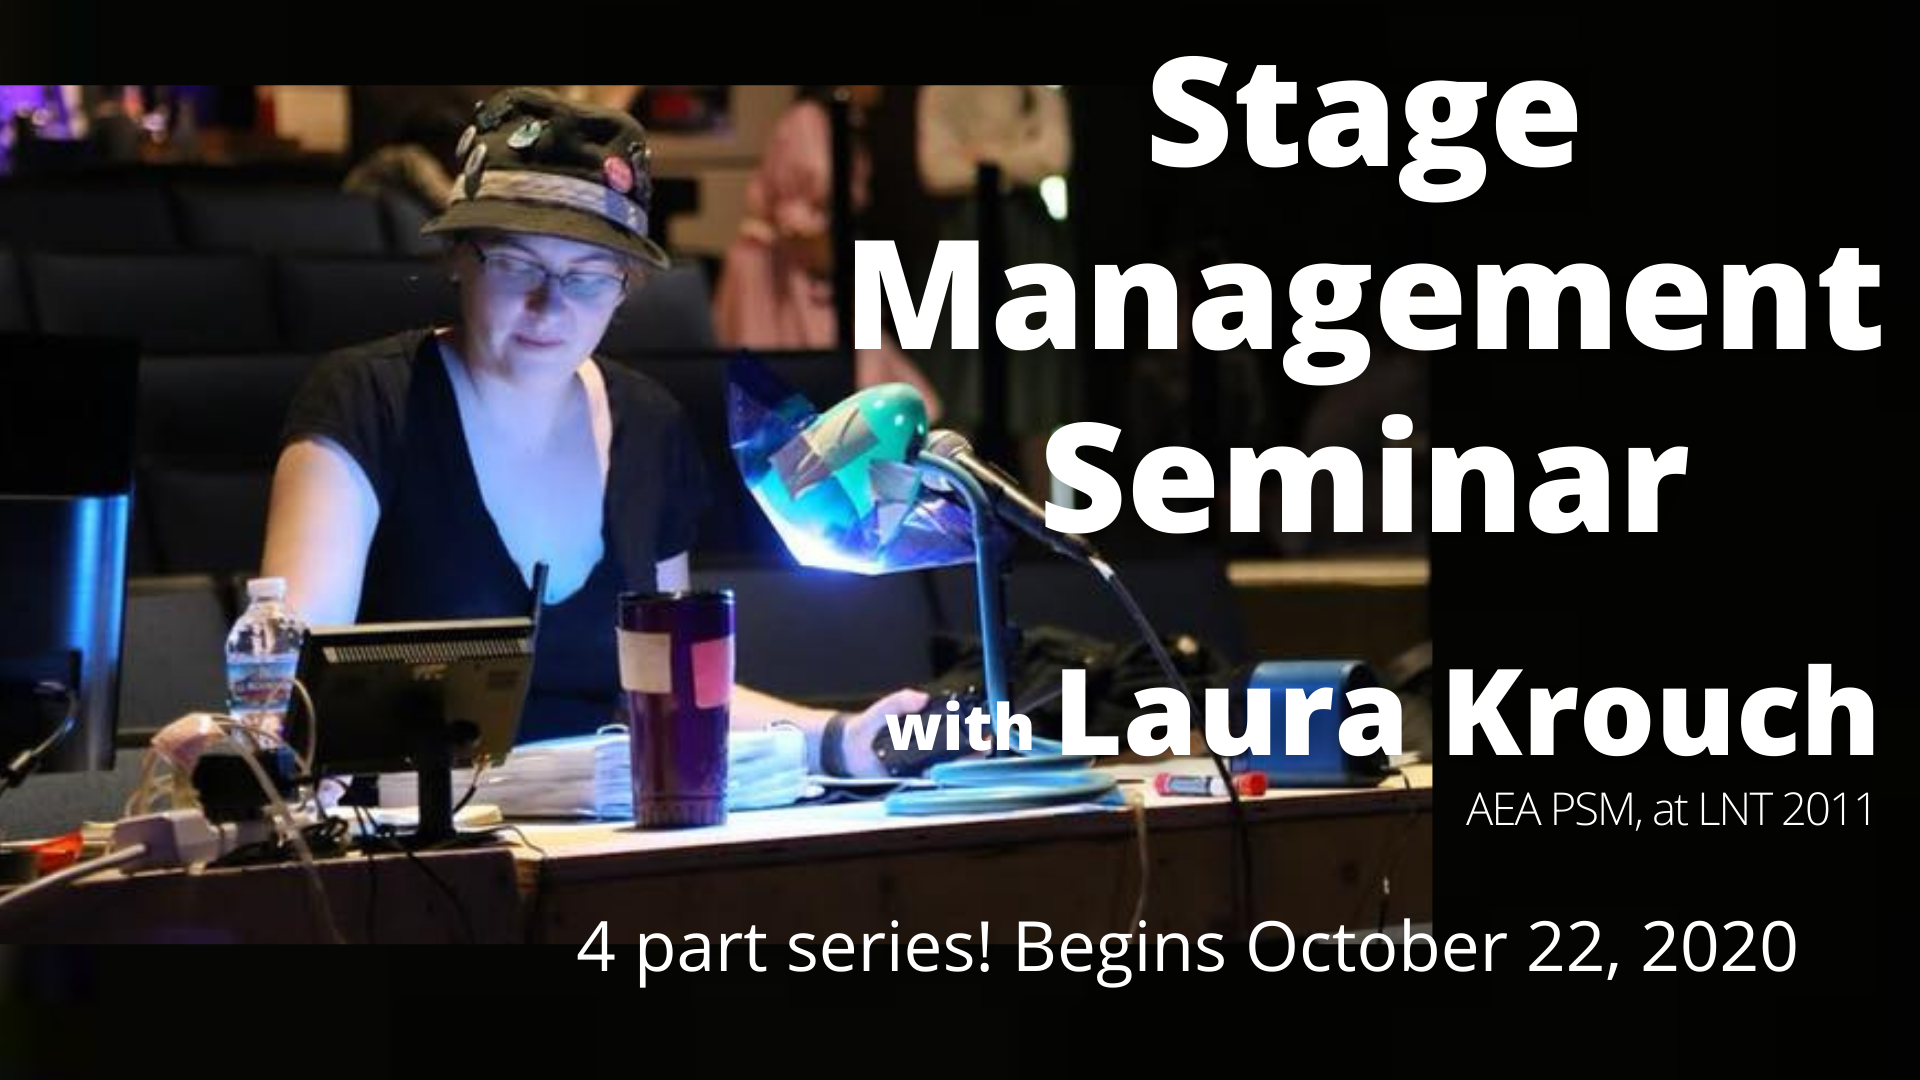 stage management seminar at Lost Nation Theater with Laura Krouch picture